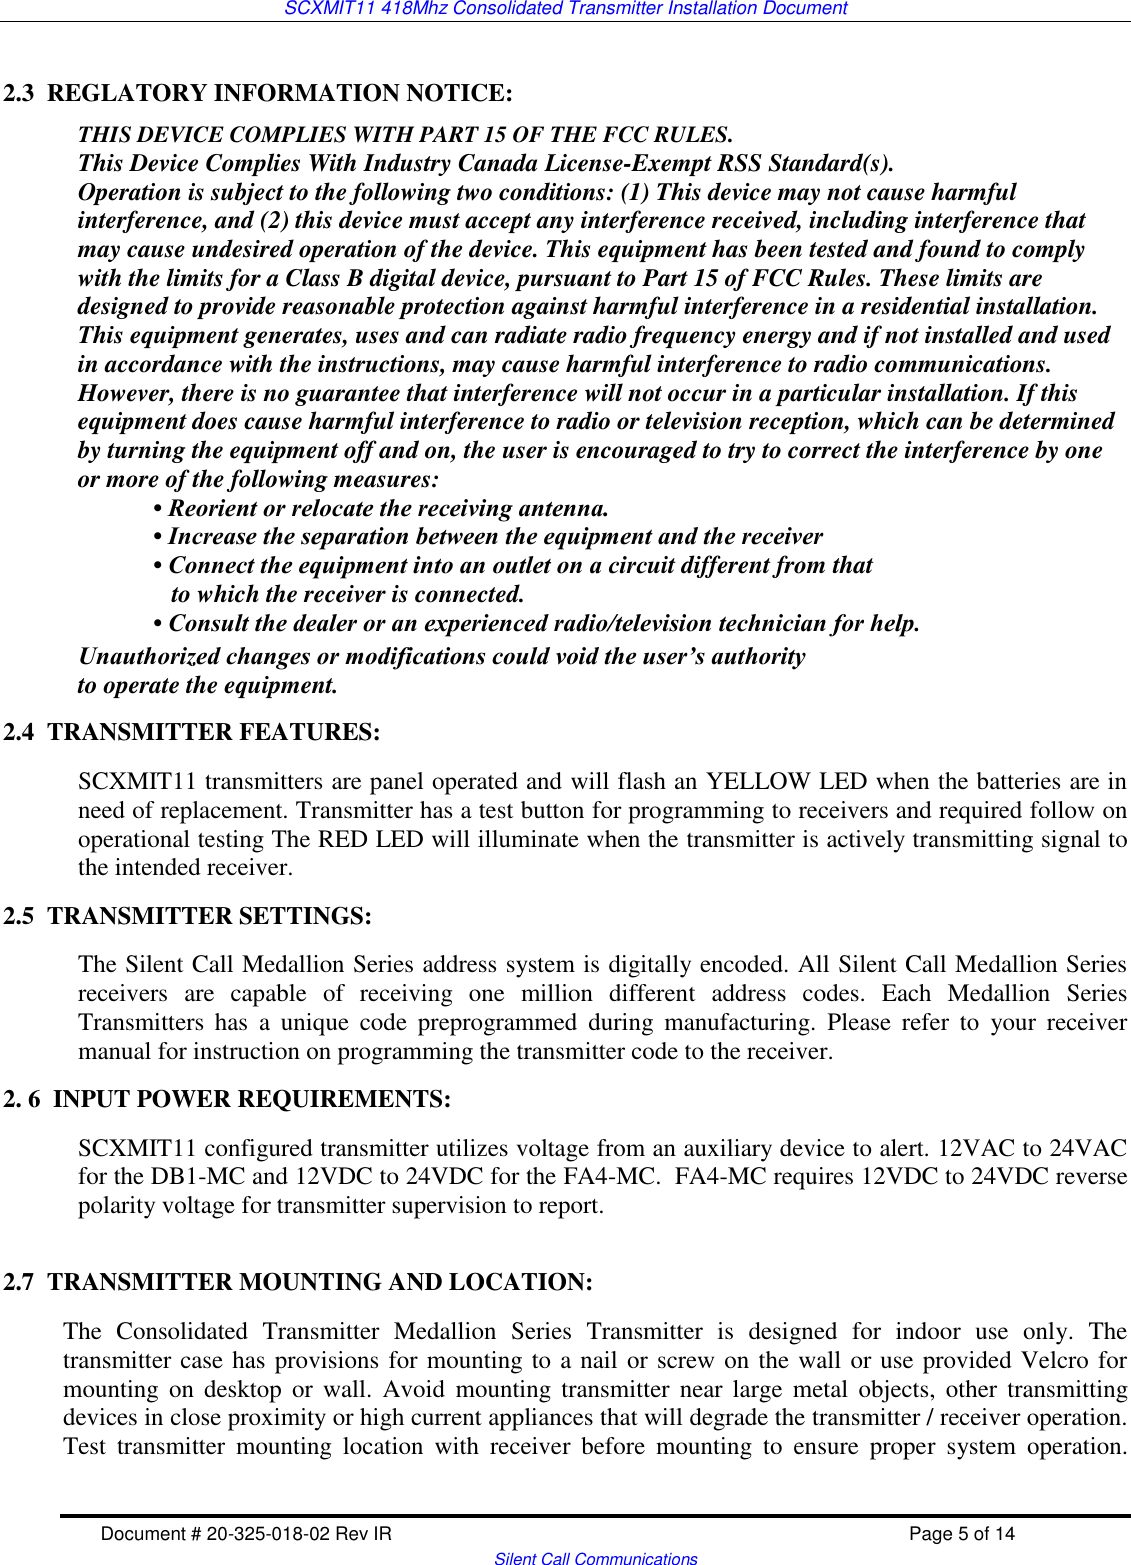 SCXMIT11 418Mhz Consolidated Transmitter Installation Document   Document # 20-325-018-02 Rev IR    Page 5 of 14   Silent Call Communications  2.3  REGLATORY INFORMATION NOTICE:   THIS DEVICE COMPLIES WITH PART 15 OF THE FCC RULES. This Device Complies With Industry Canada License-Exempt RSS Standard(s). Operation is subject to the following two conditions: (1) This device may not cause harmful interference, and (2) this device must accept any interference received, including interference that may cause undesired operation of the device. This equipment has been tested and found to comply with the limits for a Class B digital device, pursuant to Part 15 of FCC Rules. These limits are designed to provide reasonable protection against harmful interference in a residential installation. This equipment generates, uses and can radiate radio frequency energy and if not installed and used in accordance with the instructions, may cause harmful interference to radio communications. However, there is no guarantee that interference will not occur in a particular installation. If this equipment does cause harmful interference to radio or television reception, which can be determined by turning the equipment off and on, the user is encouraged to try to correct the interference by one or more of the following measures: • Reorient or relocate the receiving antenna. • Increase the separation between the equipment and the receiver • Connect the equipment into an outlet on a circuit different from that    to which the receiver is connected. • Consult the dealer or an experienced radio/television technician for help. Unauthorized changes or modifications could void the user’s authority to operate the equipment. 2.4  TRANSMITTER FEATURES: SCXMIT11 transmitters are panel operated and will flash an YELLOW LED when the batteries are in need of replacement. Transmitter has a test button for programming to receivers and required follow on operational testing The RED LED will illuminate when the transmitter is actively transmitting signal to the intended receiver.  2.5  TRANSMITTER SETTINGS: The Silent Call Medallion Series address system is digitally encoded. All Silent Call Medallion Series receivers  are  capable  of  receiving  one  million  different  address  codes.  Each  Medallion  Series Transmitters  has  a  unique  code  preprogrammed  during  manufacturing.  Please  refer  to  your  receiver manual for instruction on programming the transmitter code to the receiver. 2. 6  INPUT POWER REQUIREMENTS: SCXMIT11 configured transmitter utilizes voltage from an auxiliary device to alert. 12VAC to 24VAC for the DB1-MC and 12VDC to 24VDC for the FA4-MC.  FA4-MC requires 12VDC to 24VDC reverse polarity voltage for transmitter supervision to report.  2.7  TRANSMITTER MOUNTING AND LOCATION:   The  Consolidated  Transmitter  Medallion  Series  Transmitter  is  designed  for  indoor  use  only.  The transmitter case has provisions for mounting to a nail or screw on the wall or use provided Velcro for mounting  on  desktop  or wall.  Avoid  mounting transmitter  near  large metal  objects, other  transmitting devices in close proximity or high current appliances that will degrade the transmitter / receiver operation. Test  transmitter  mounting  location  with  receiver  before  mounting  to  ensure  proper  system  operation. 